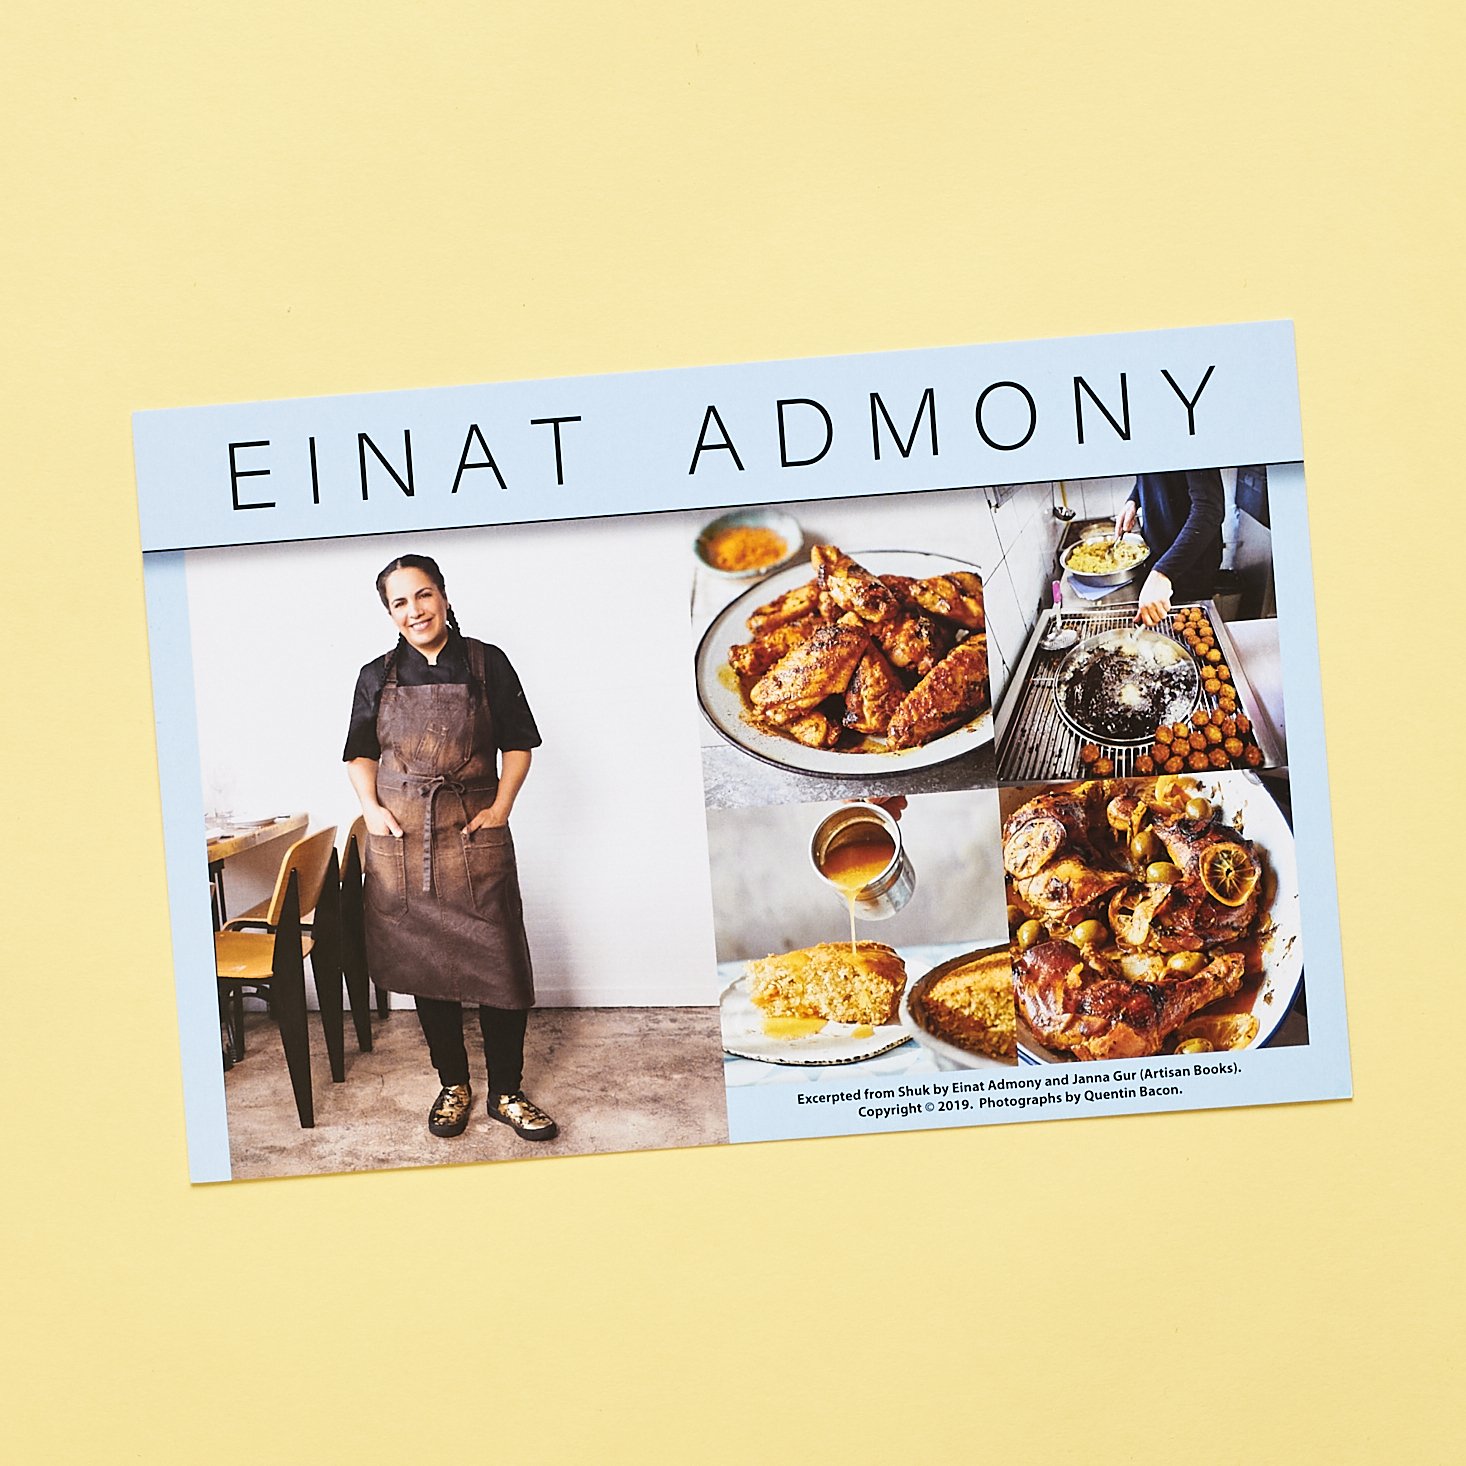 Info card featuring photograph of chef curator Einat Admony